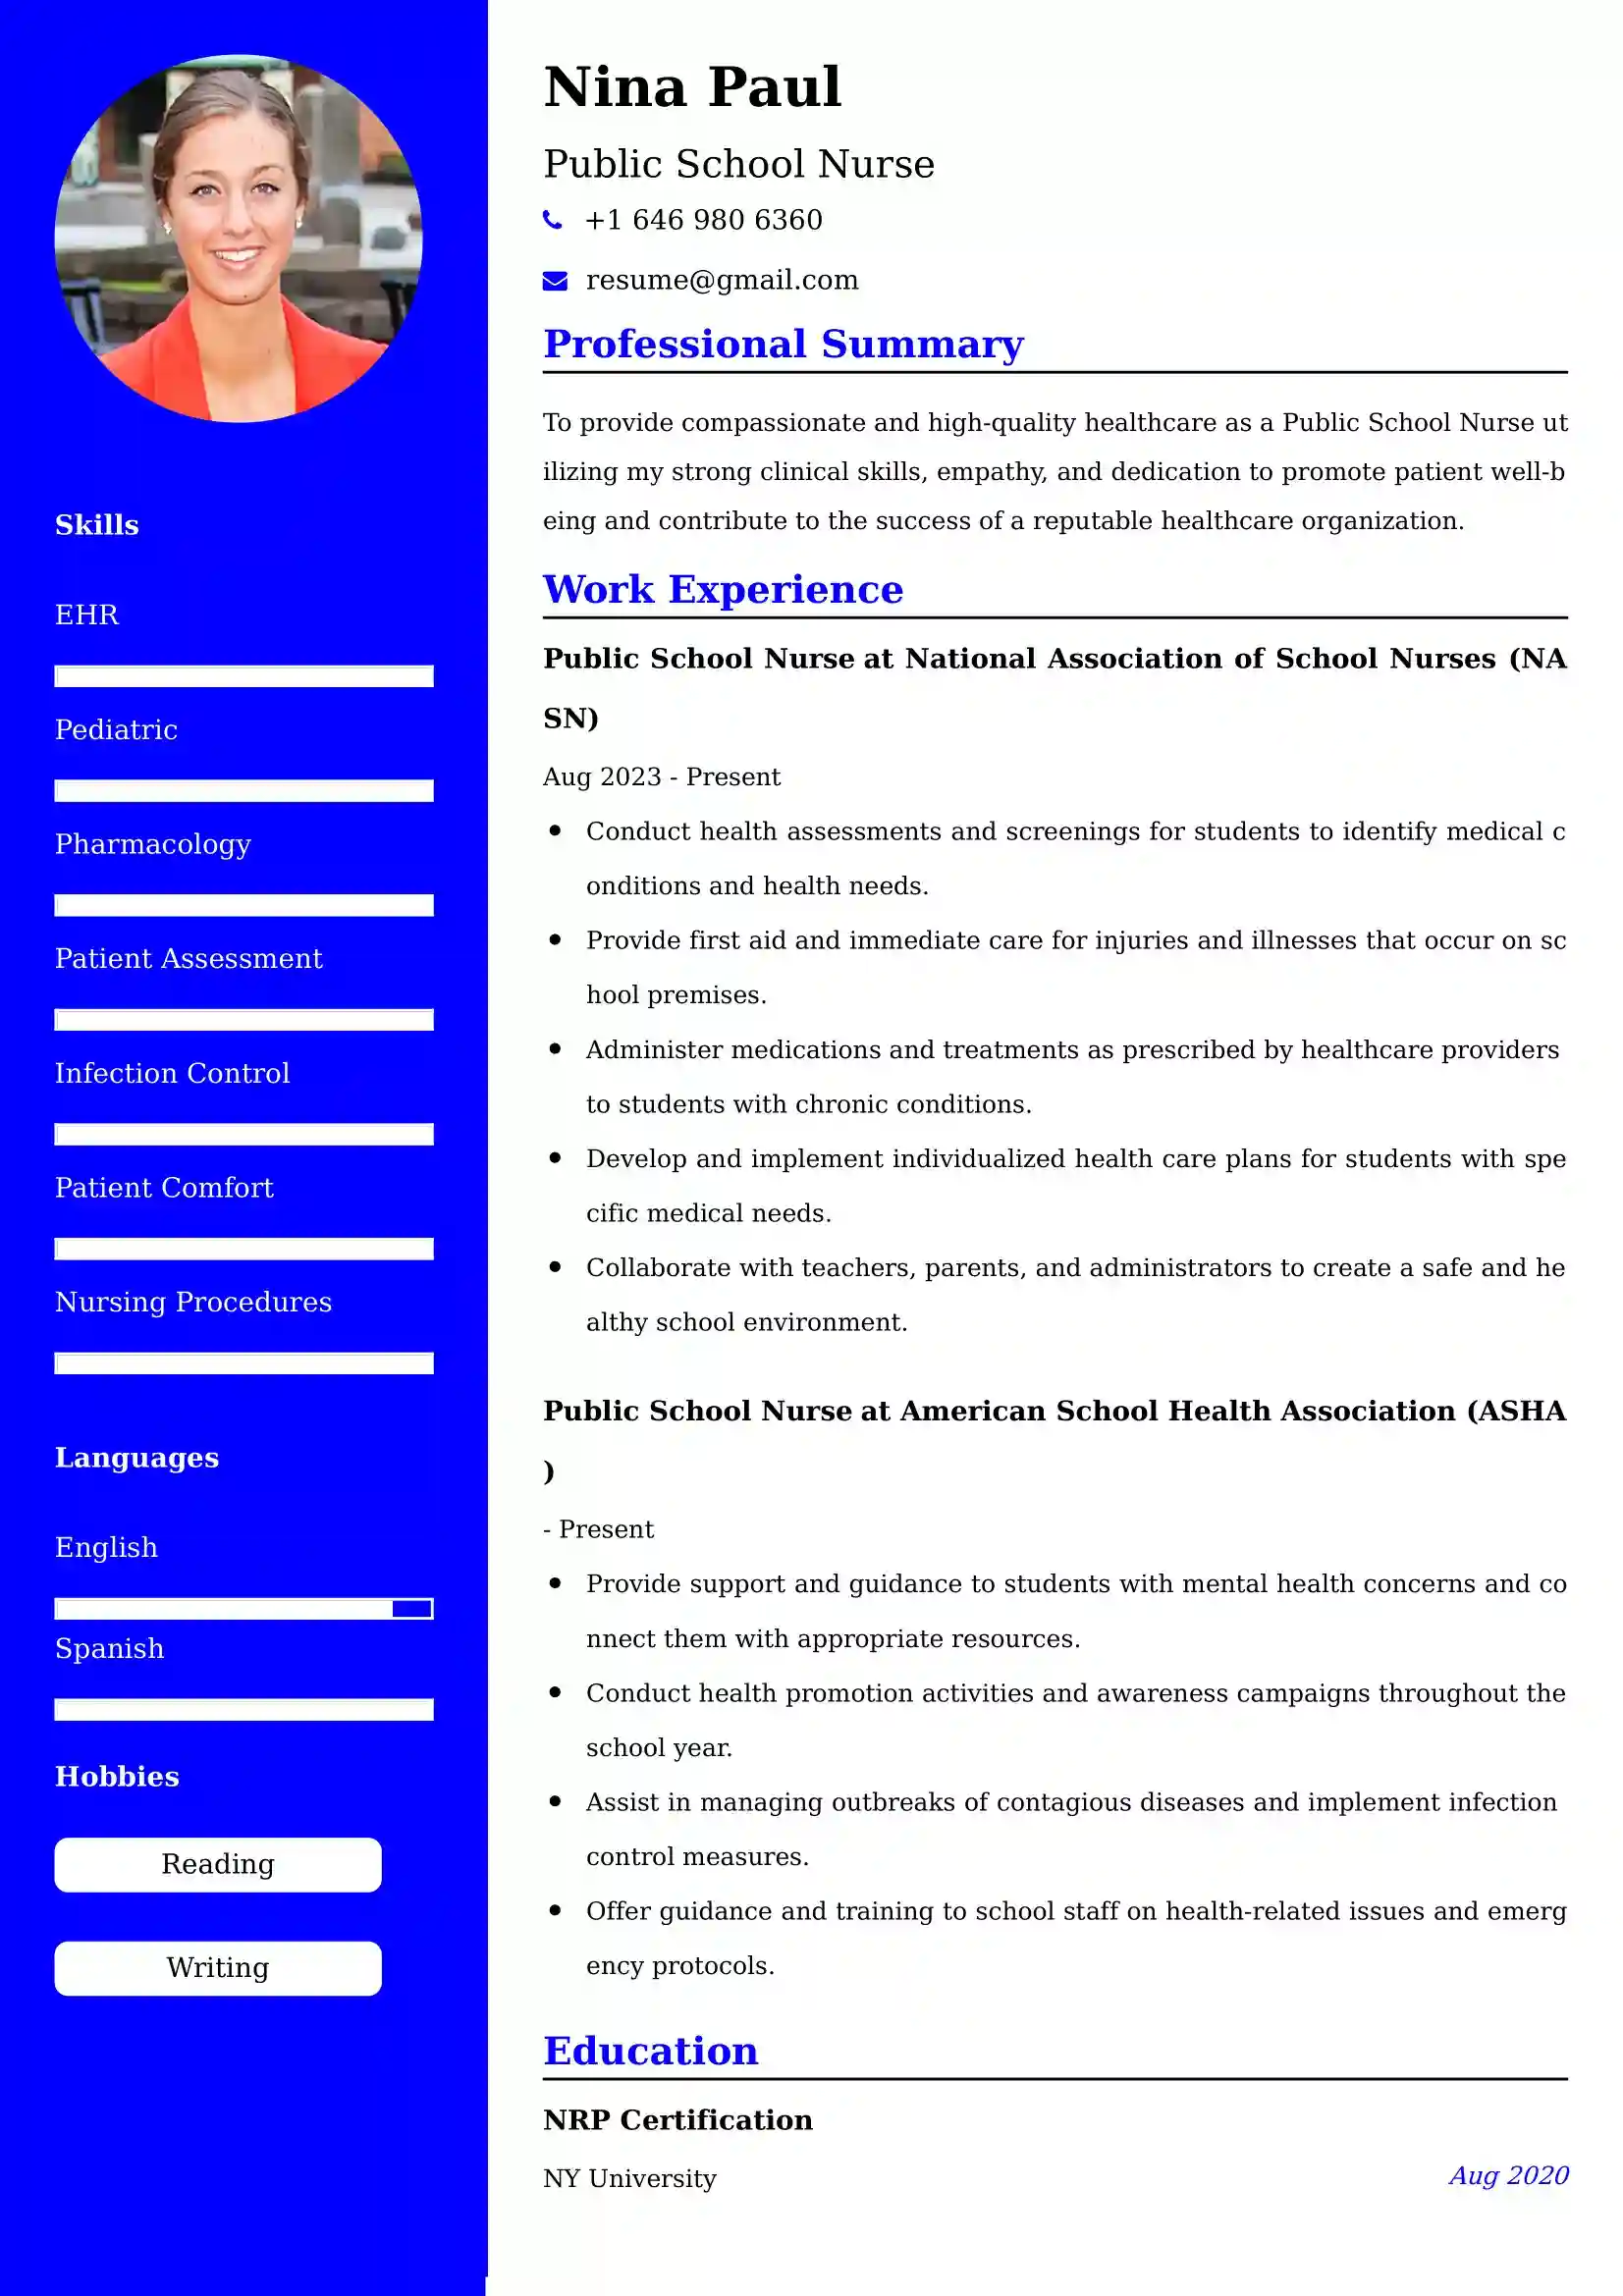 Public School Nurse Resume Examples for UK Jobs - Tips and Guide